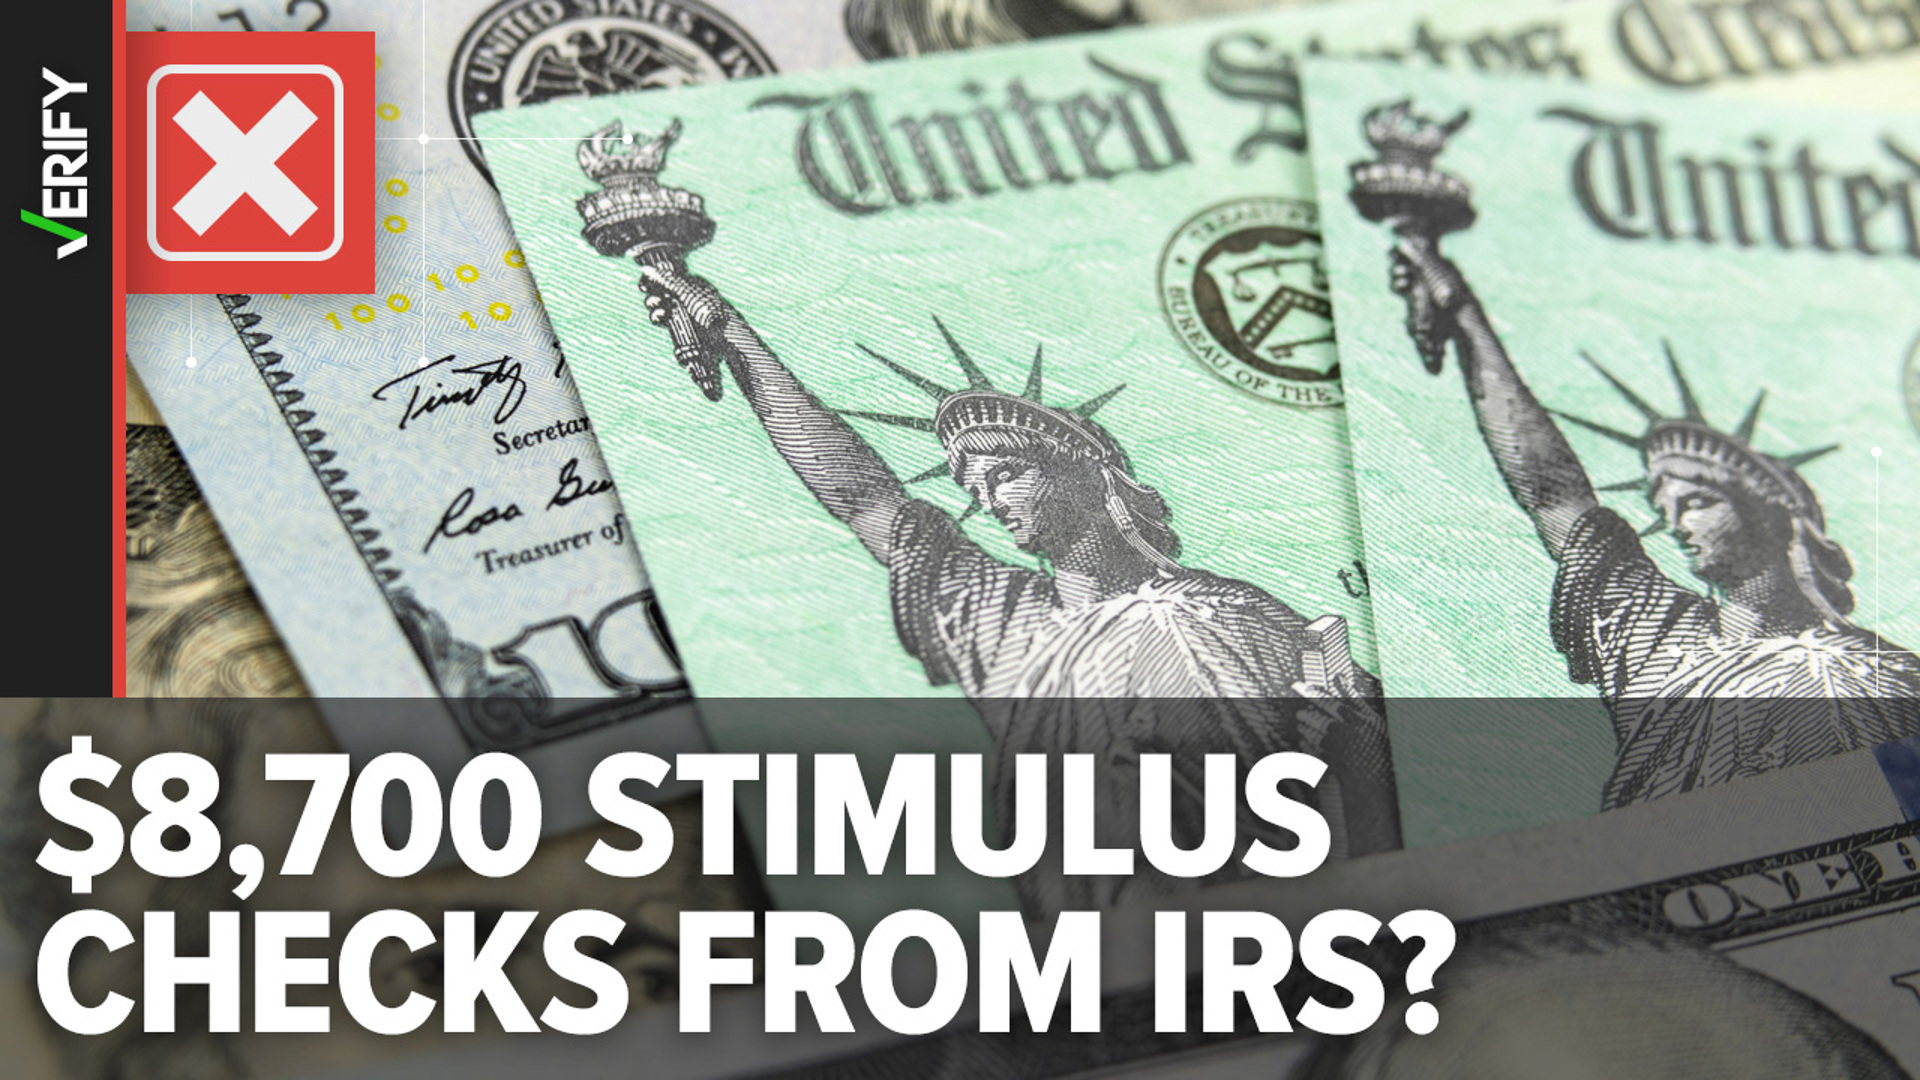 Despite many false claims, the IRS is not sending out additional stimulus checks. Suspicious ‘content farm’ sites appear to be fueling a recent Google search trend.